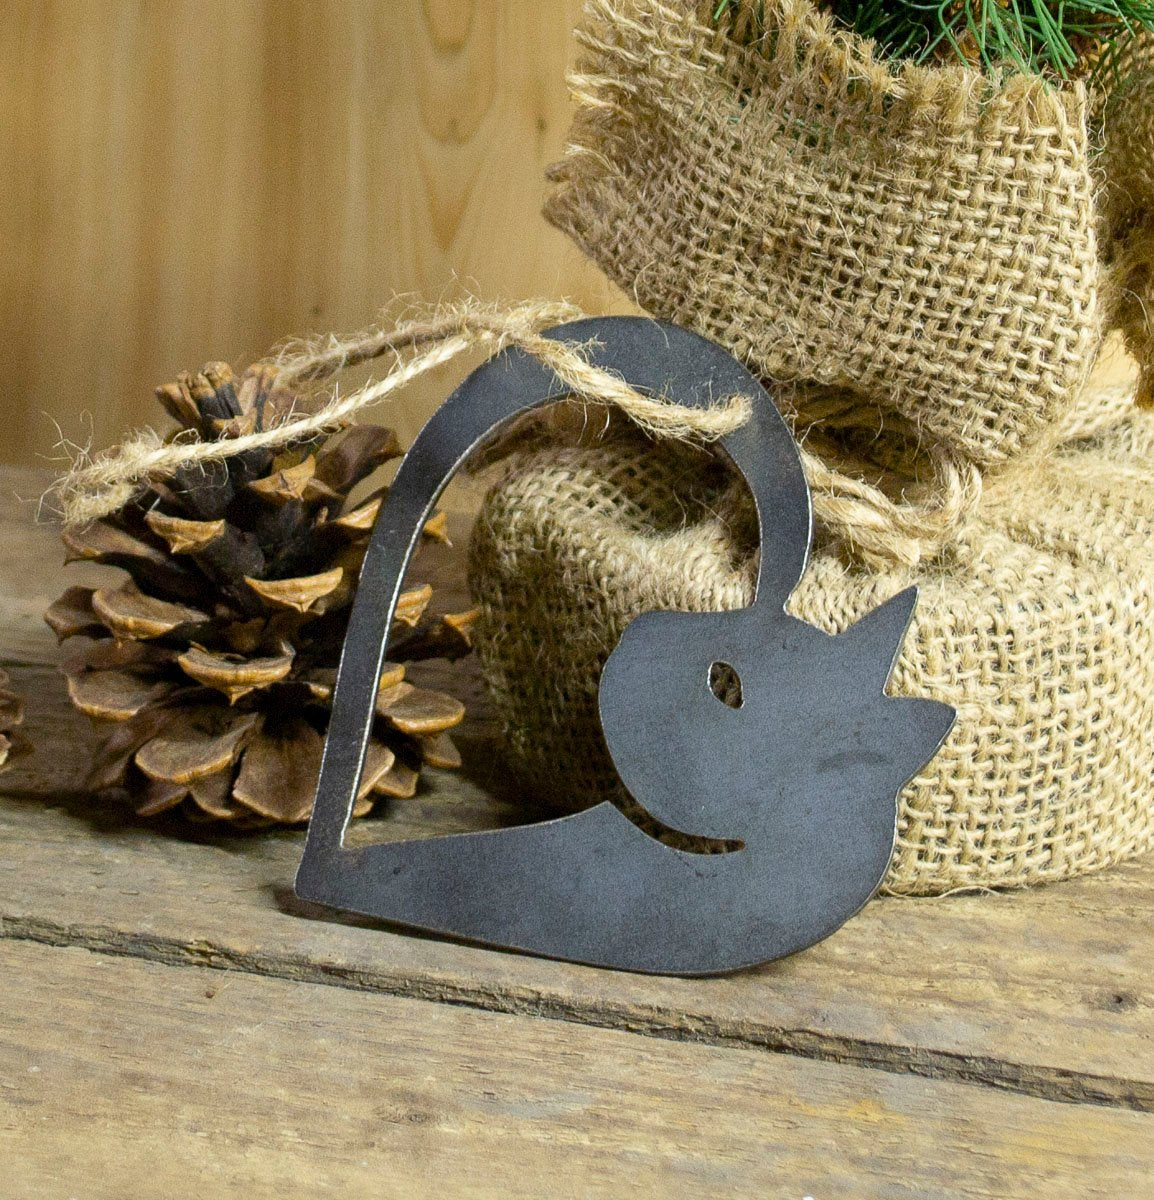 Cat Heart Metal Christmas Ornament Tree Stocking Stuffer Party Favor Holiday Decoration Raw Steel Gift Recycled Nature Home Decor